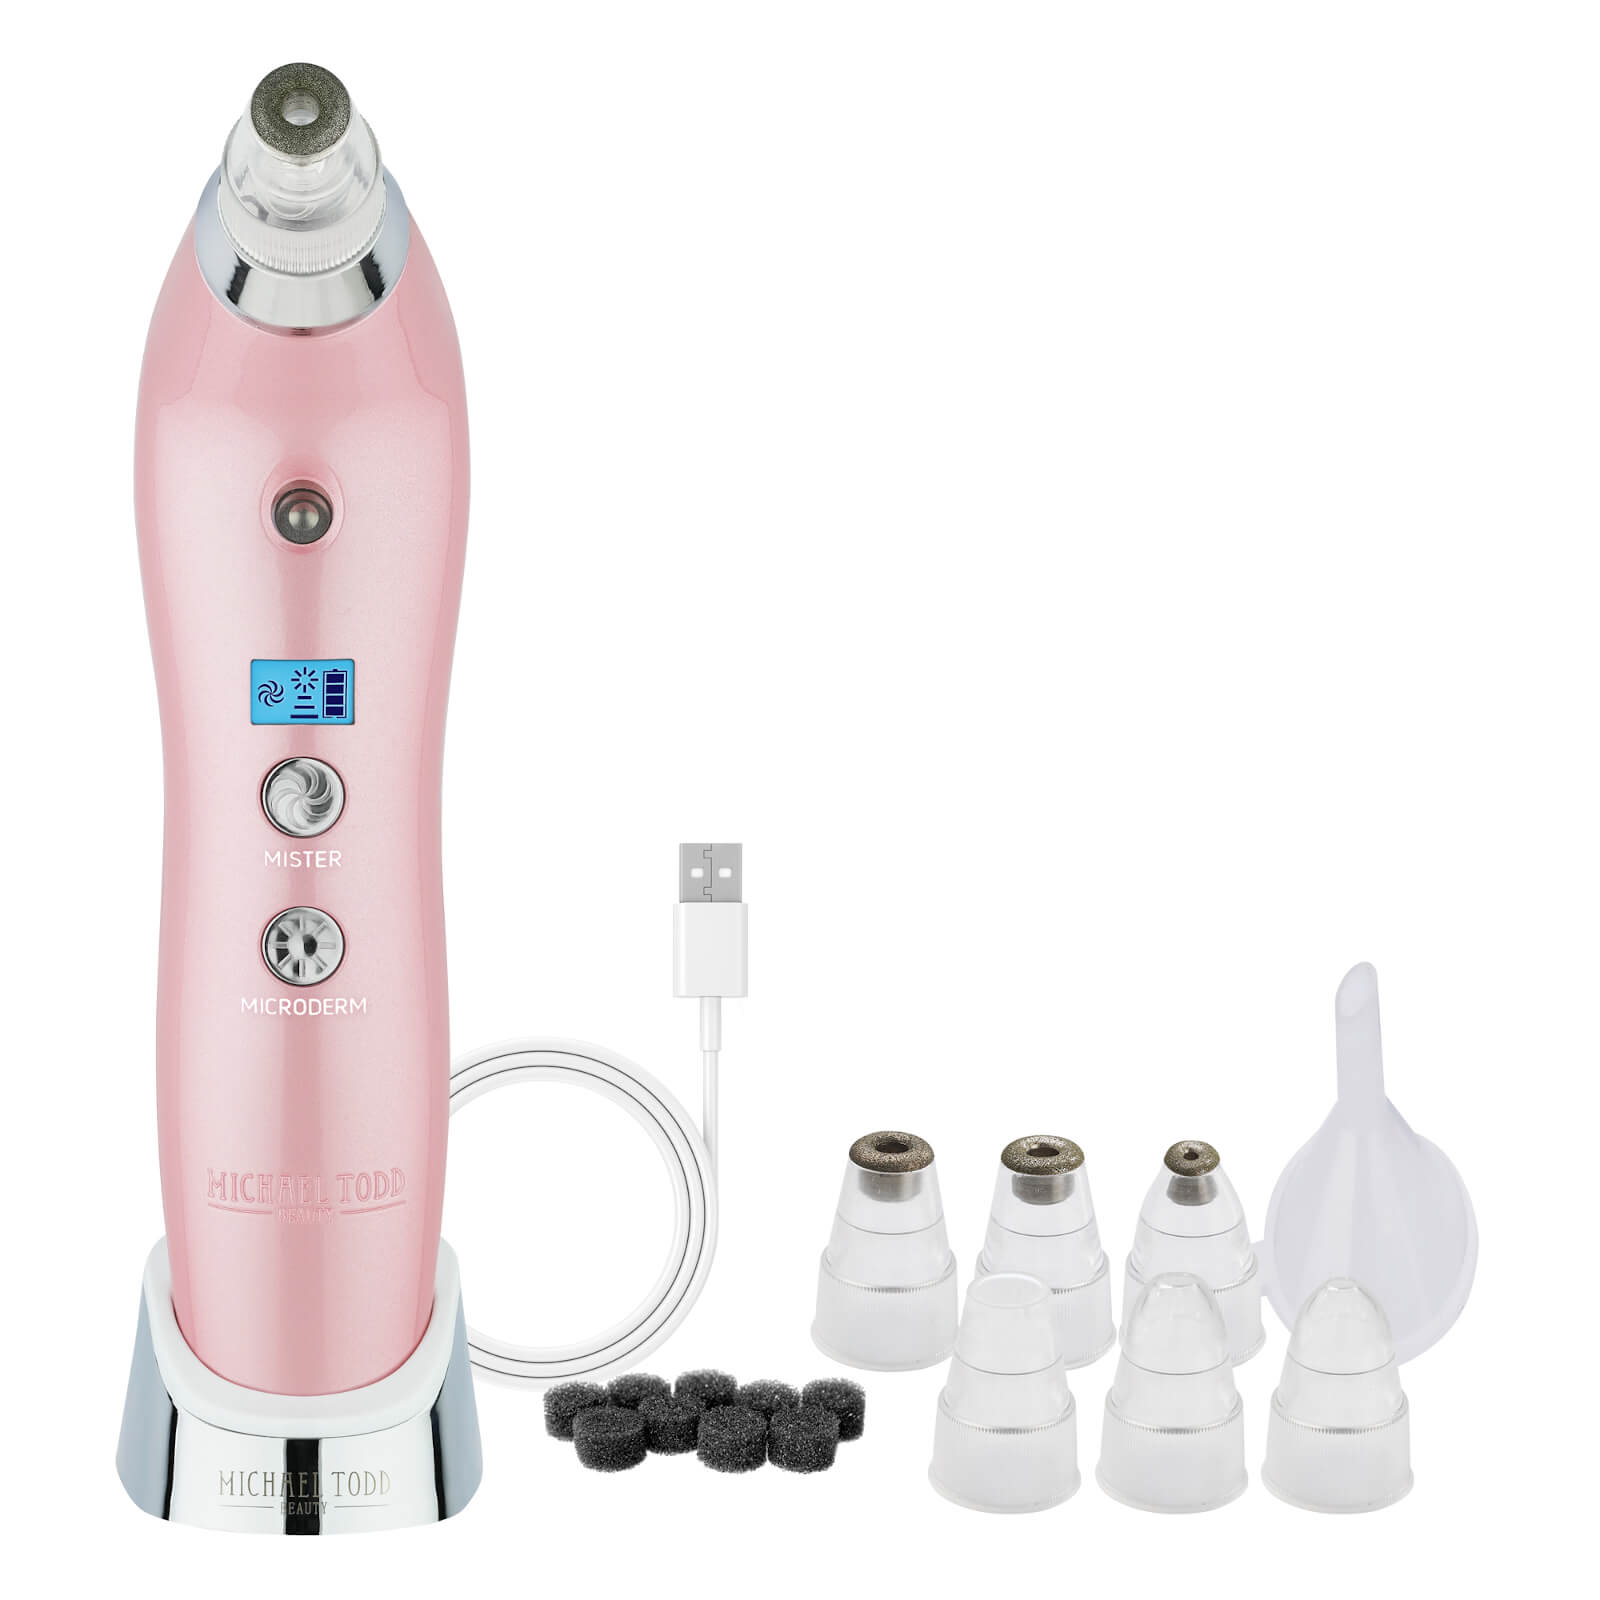 Michael Todd Beauty Sonic Refresher Wet/Dry Sonic Microdermabrasion and Pore Extraction System (Various Shades) - Metallic Pink